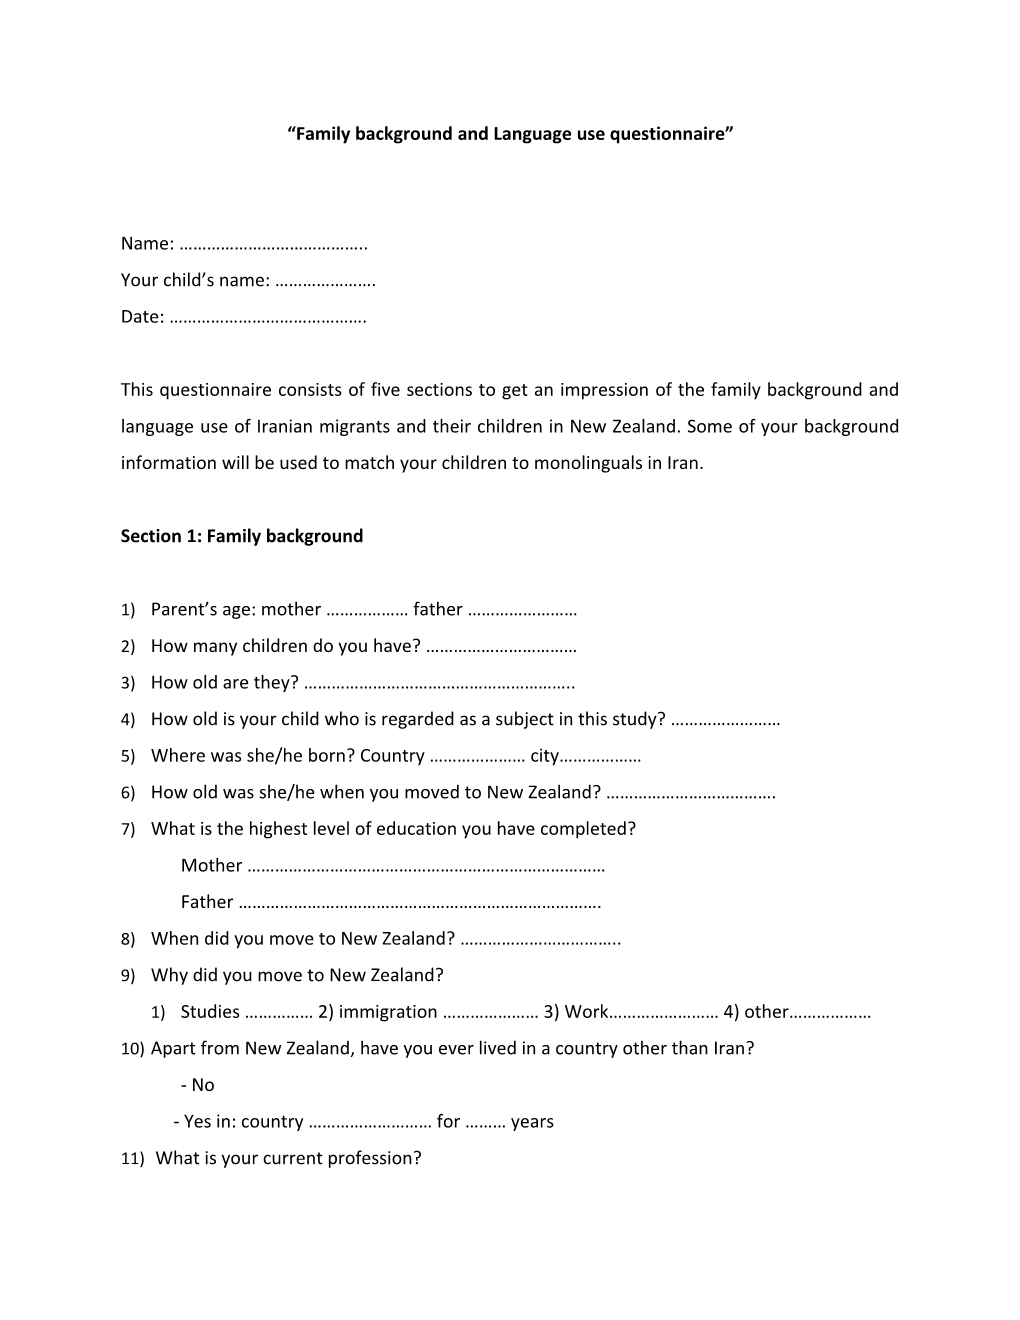 Family Background and Language Use Questionnaire